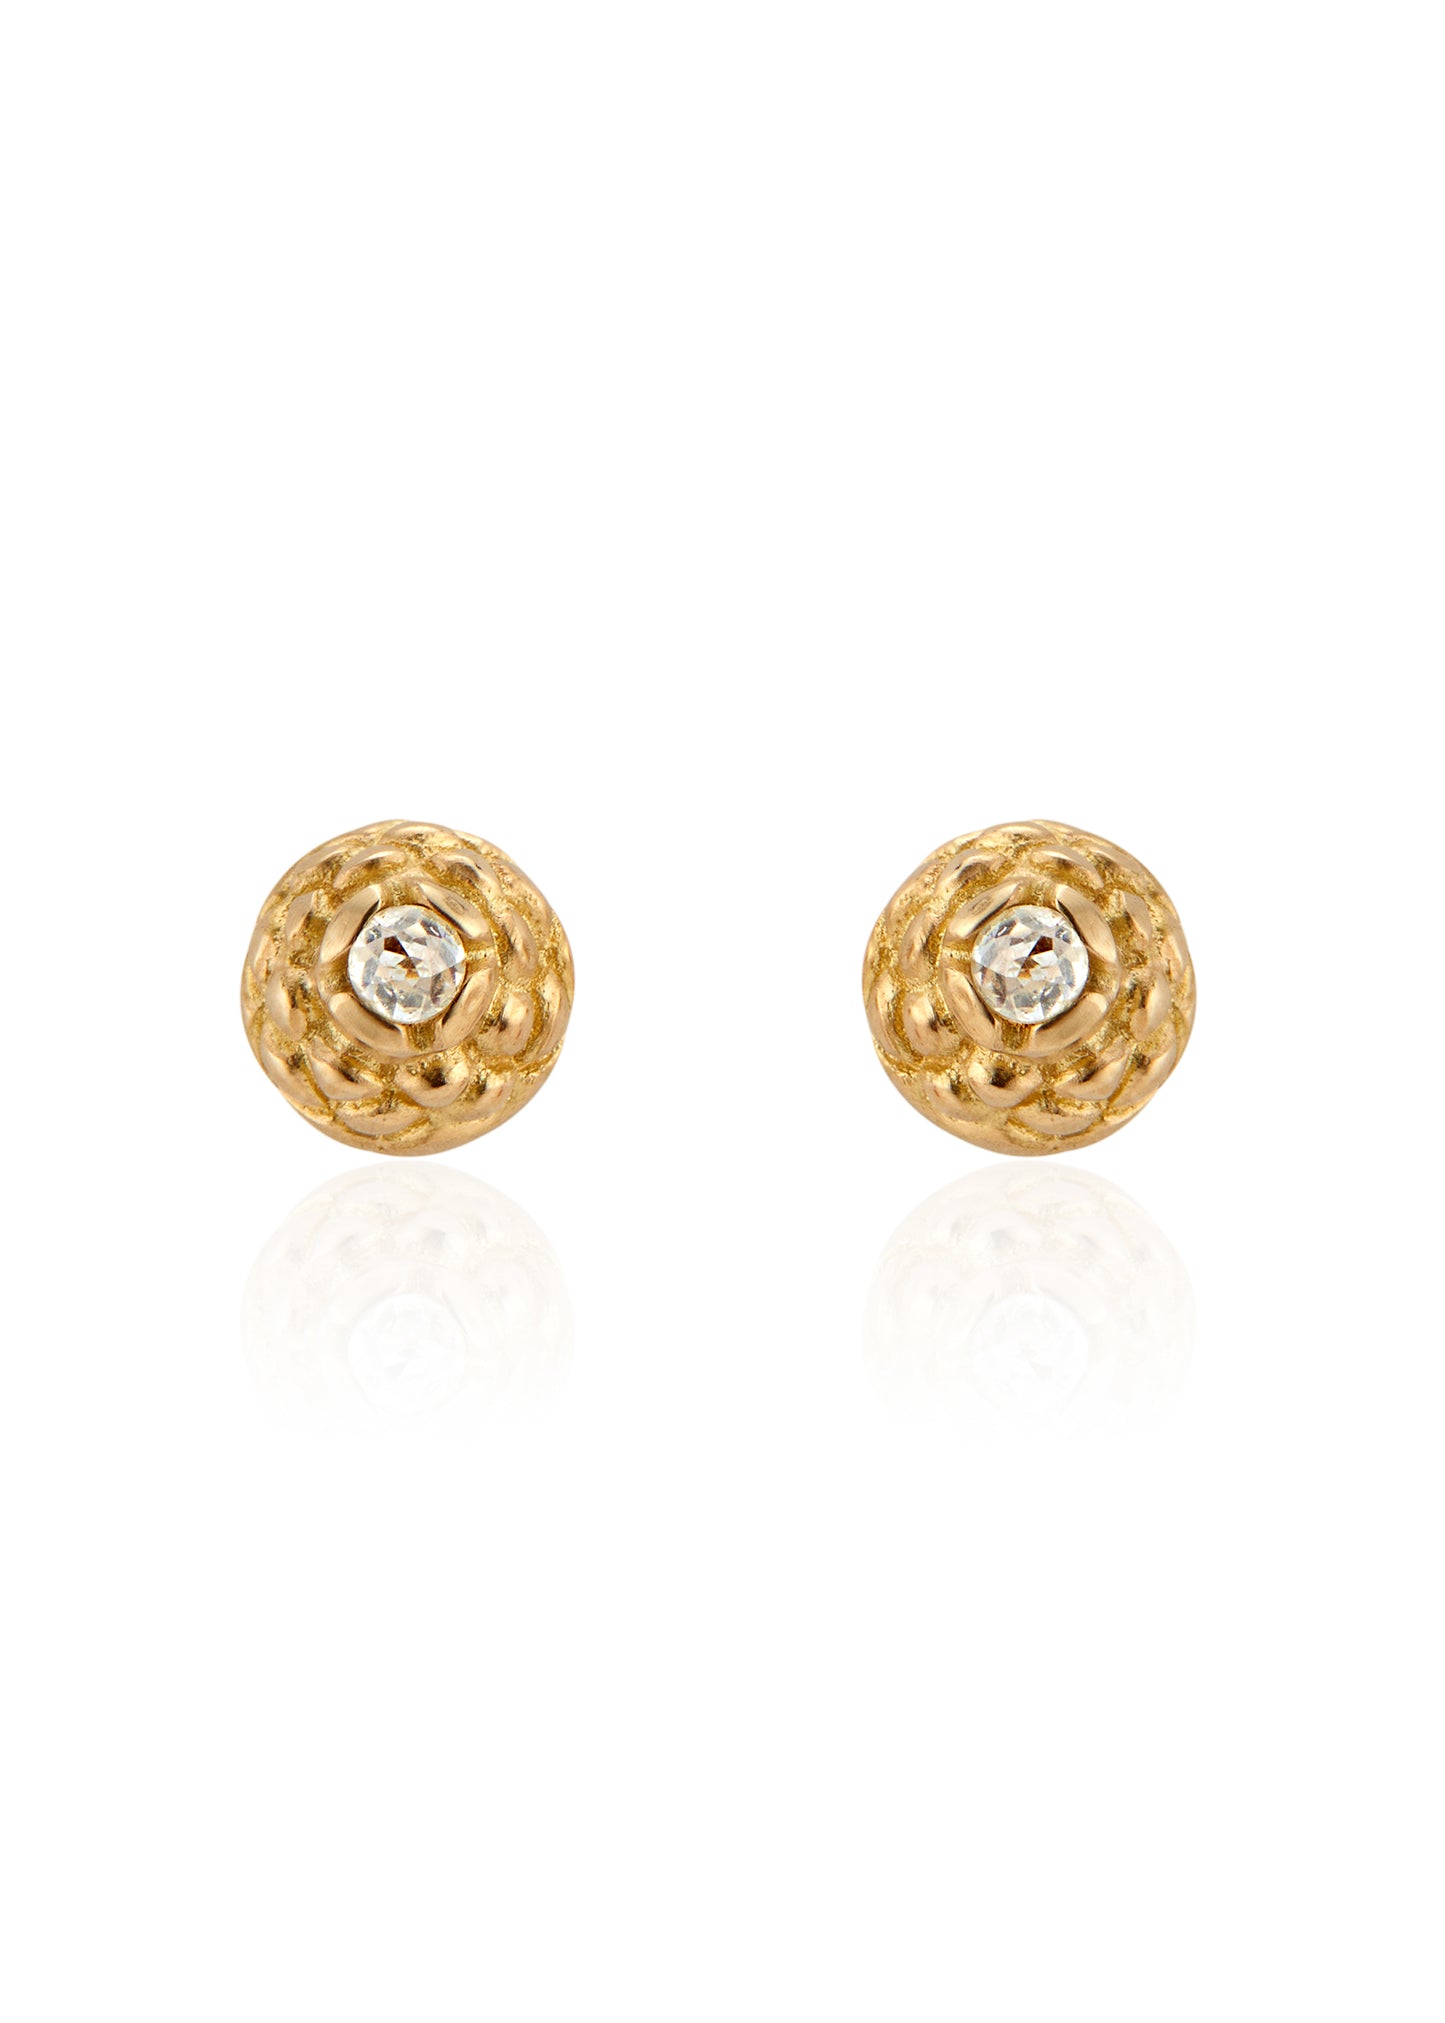 Featuring intricate hand-carved beads that center around brilliant rose cut diamonds, the Marquis earring is fit for royalty and reimagined for everyday wear. 